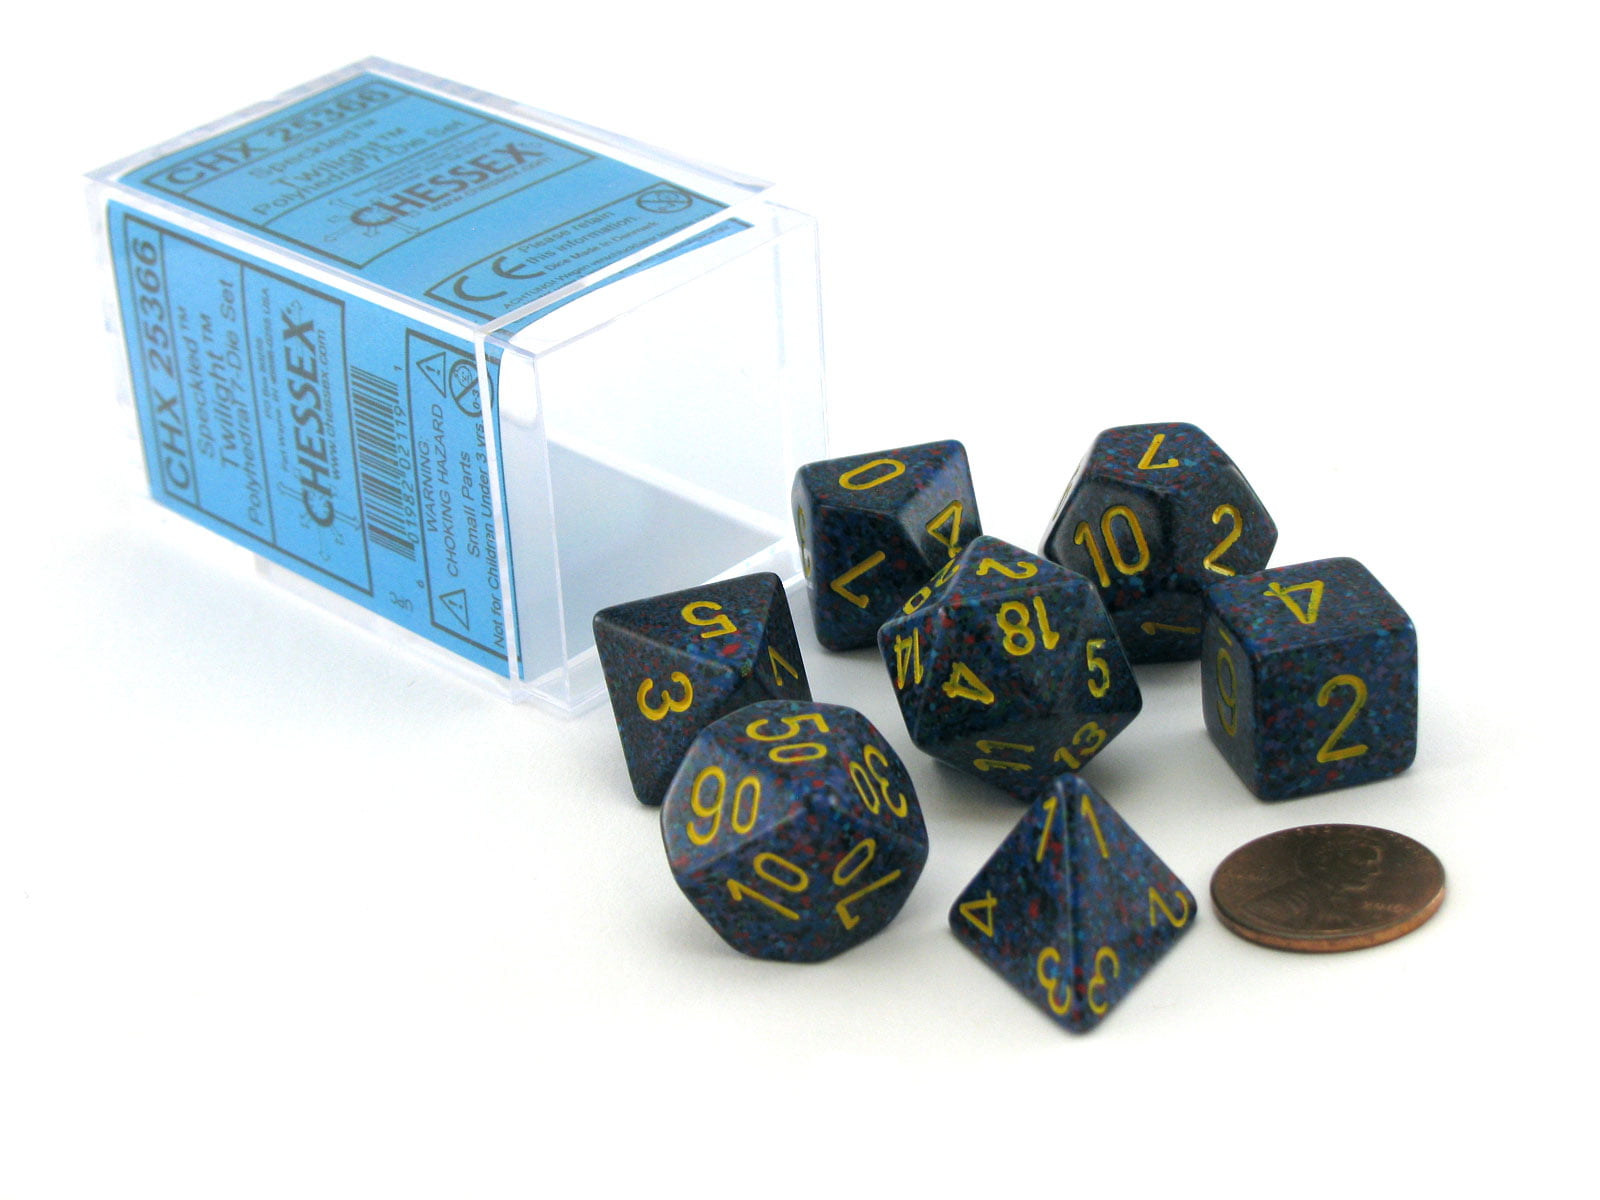 –Space & Blue Stars Bag Speckled 16mm D6 Chessex Dice 6 Dice Twilight 